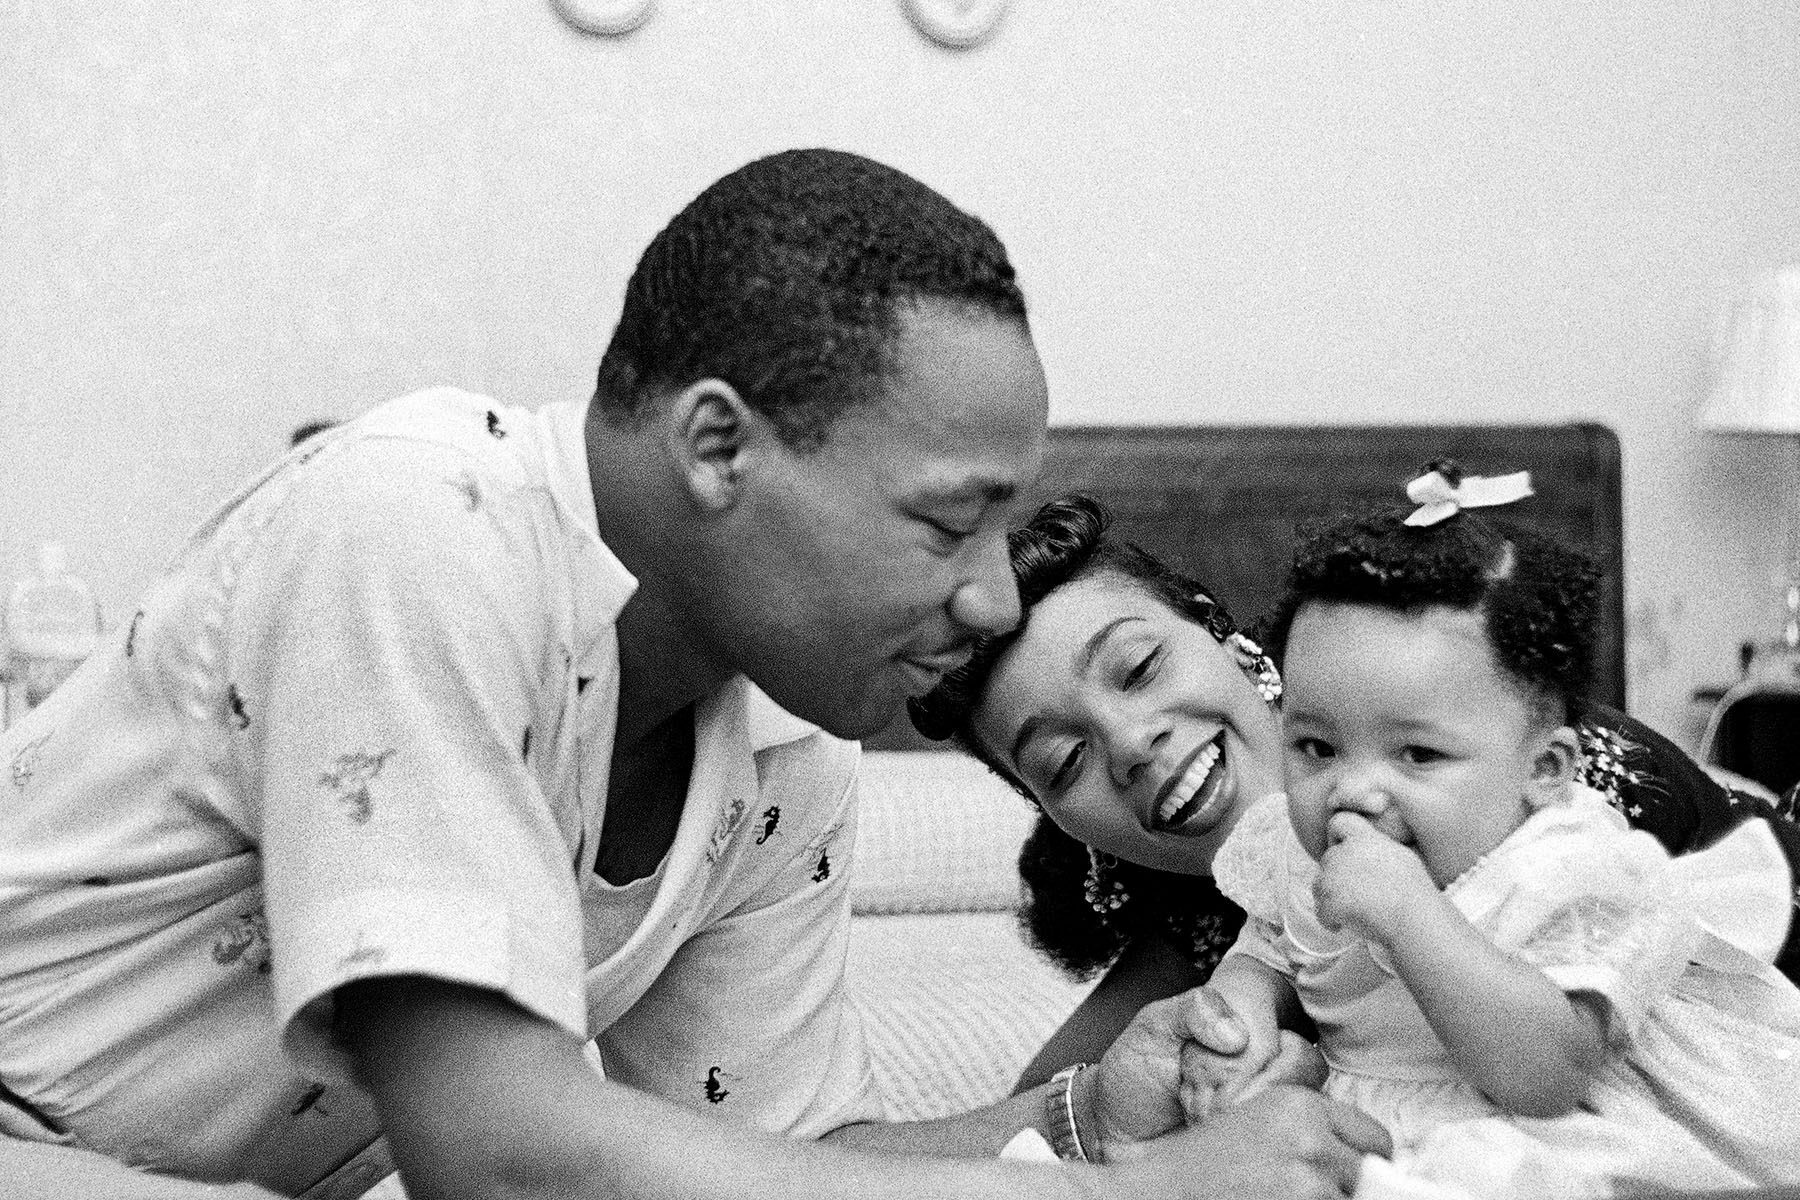 MLK Jr. plays with his daughter Yolanda while his wife holds her.